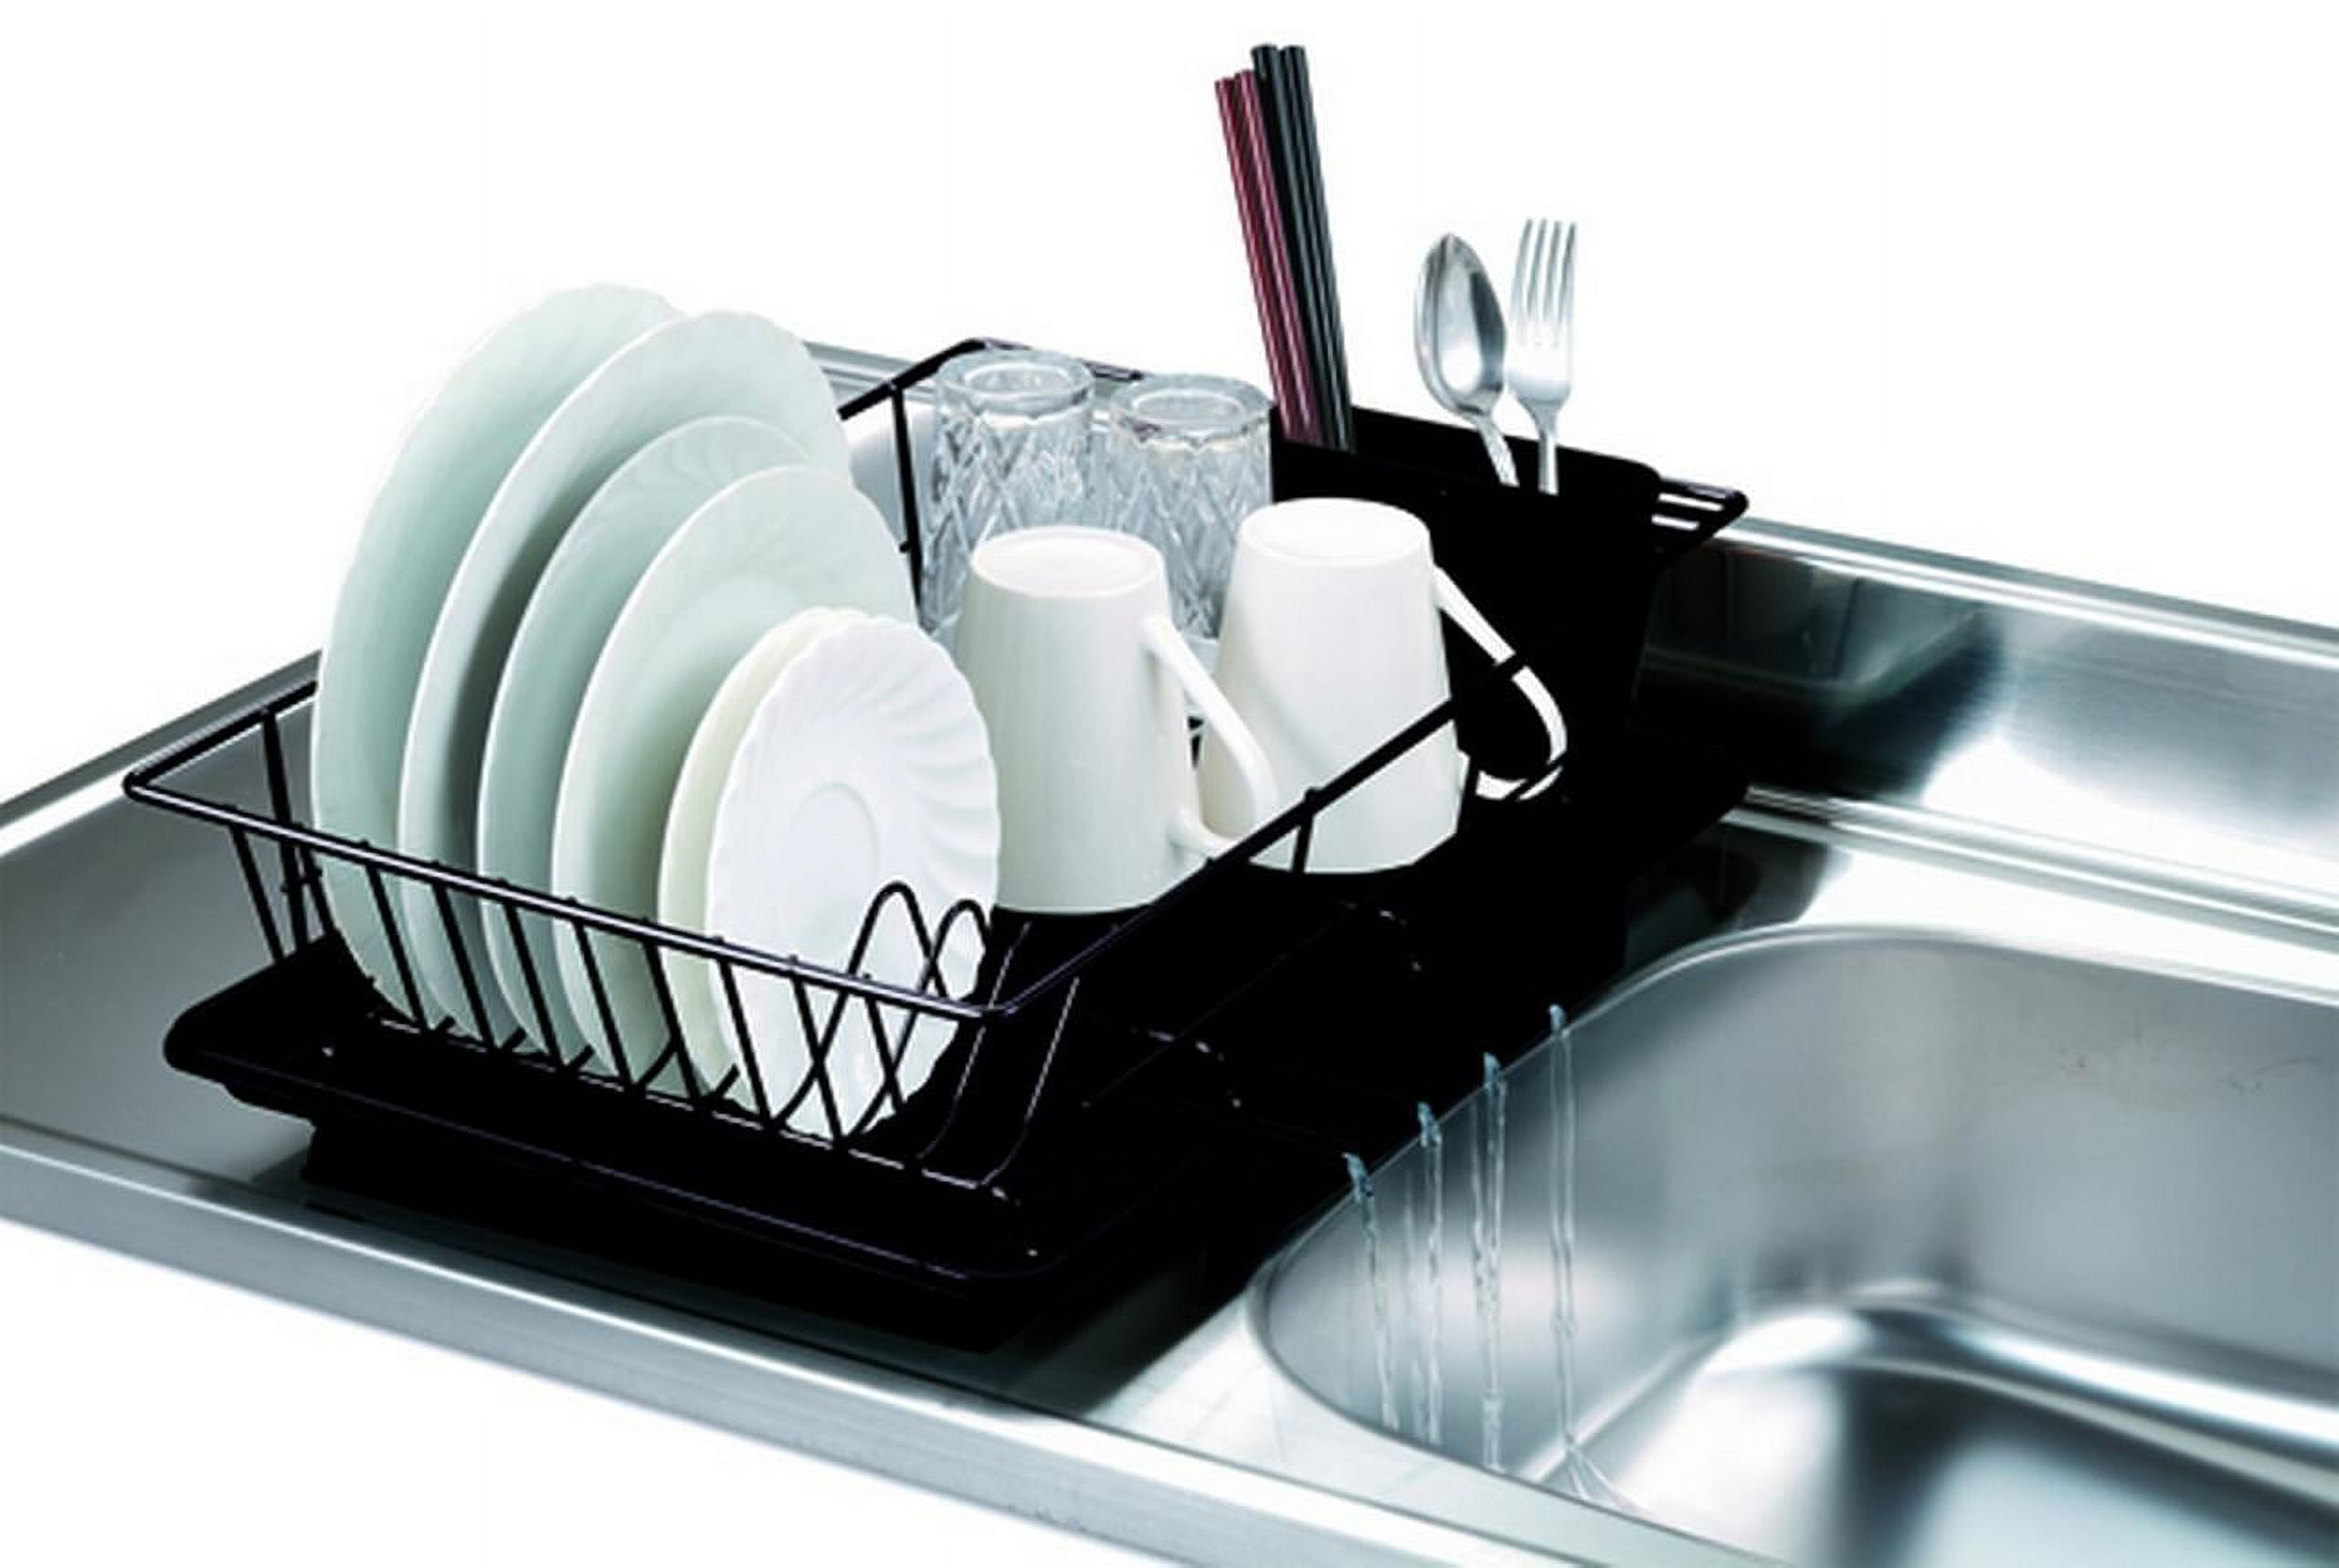 Home Basics 11-in W x 22-in L x 13.5-in H Plastic Dish Rack and Drip Tray  in the Dish Racks & Trays department at